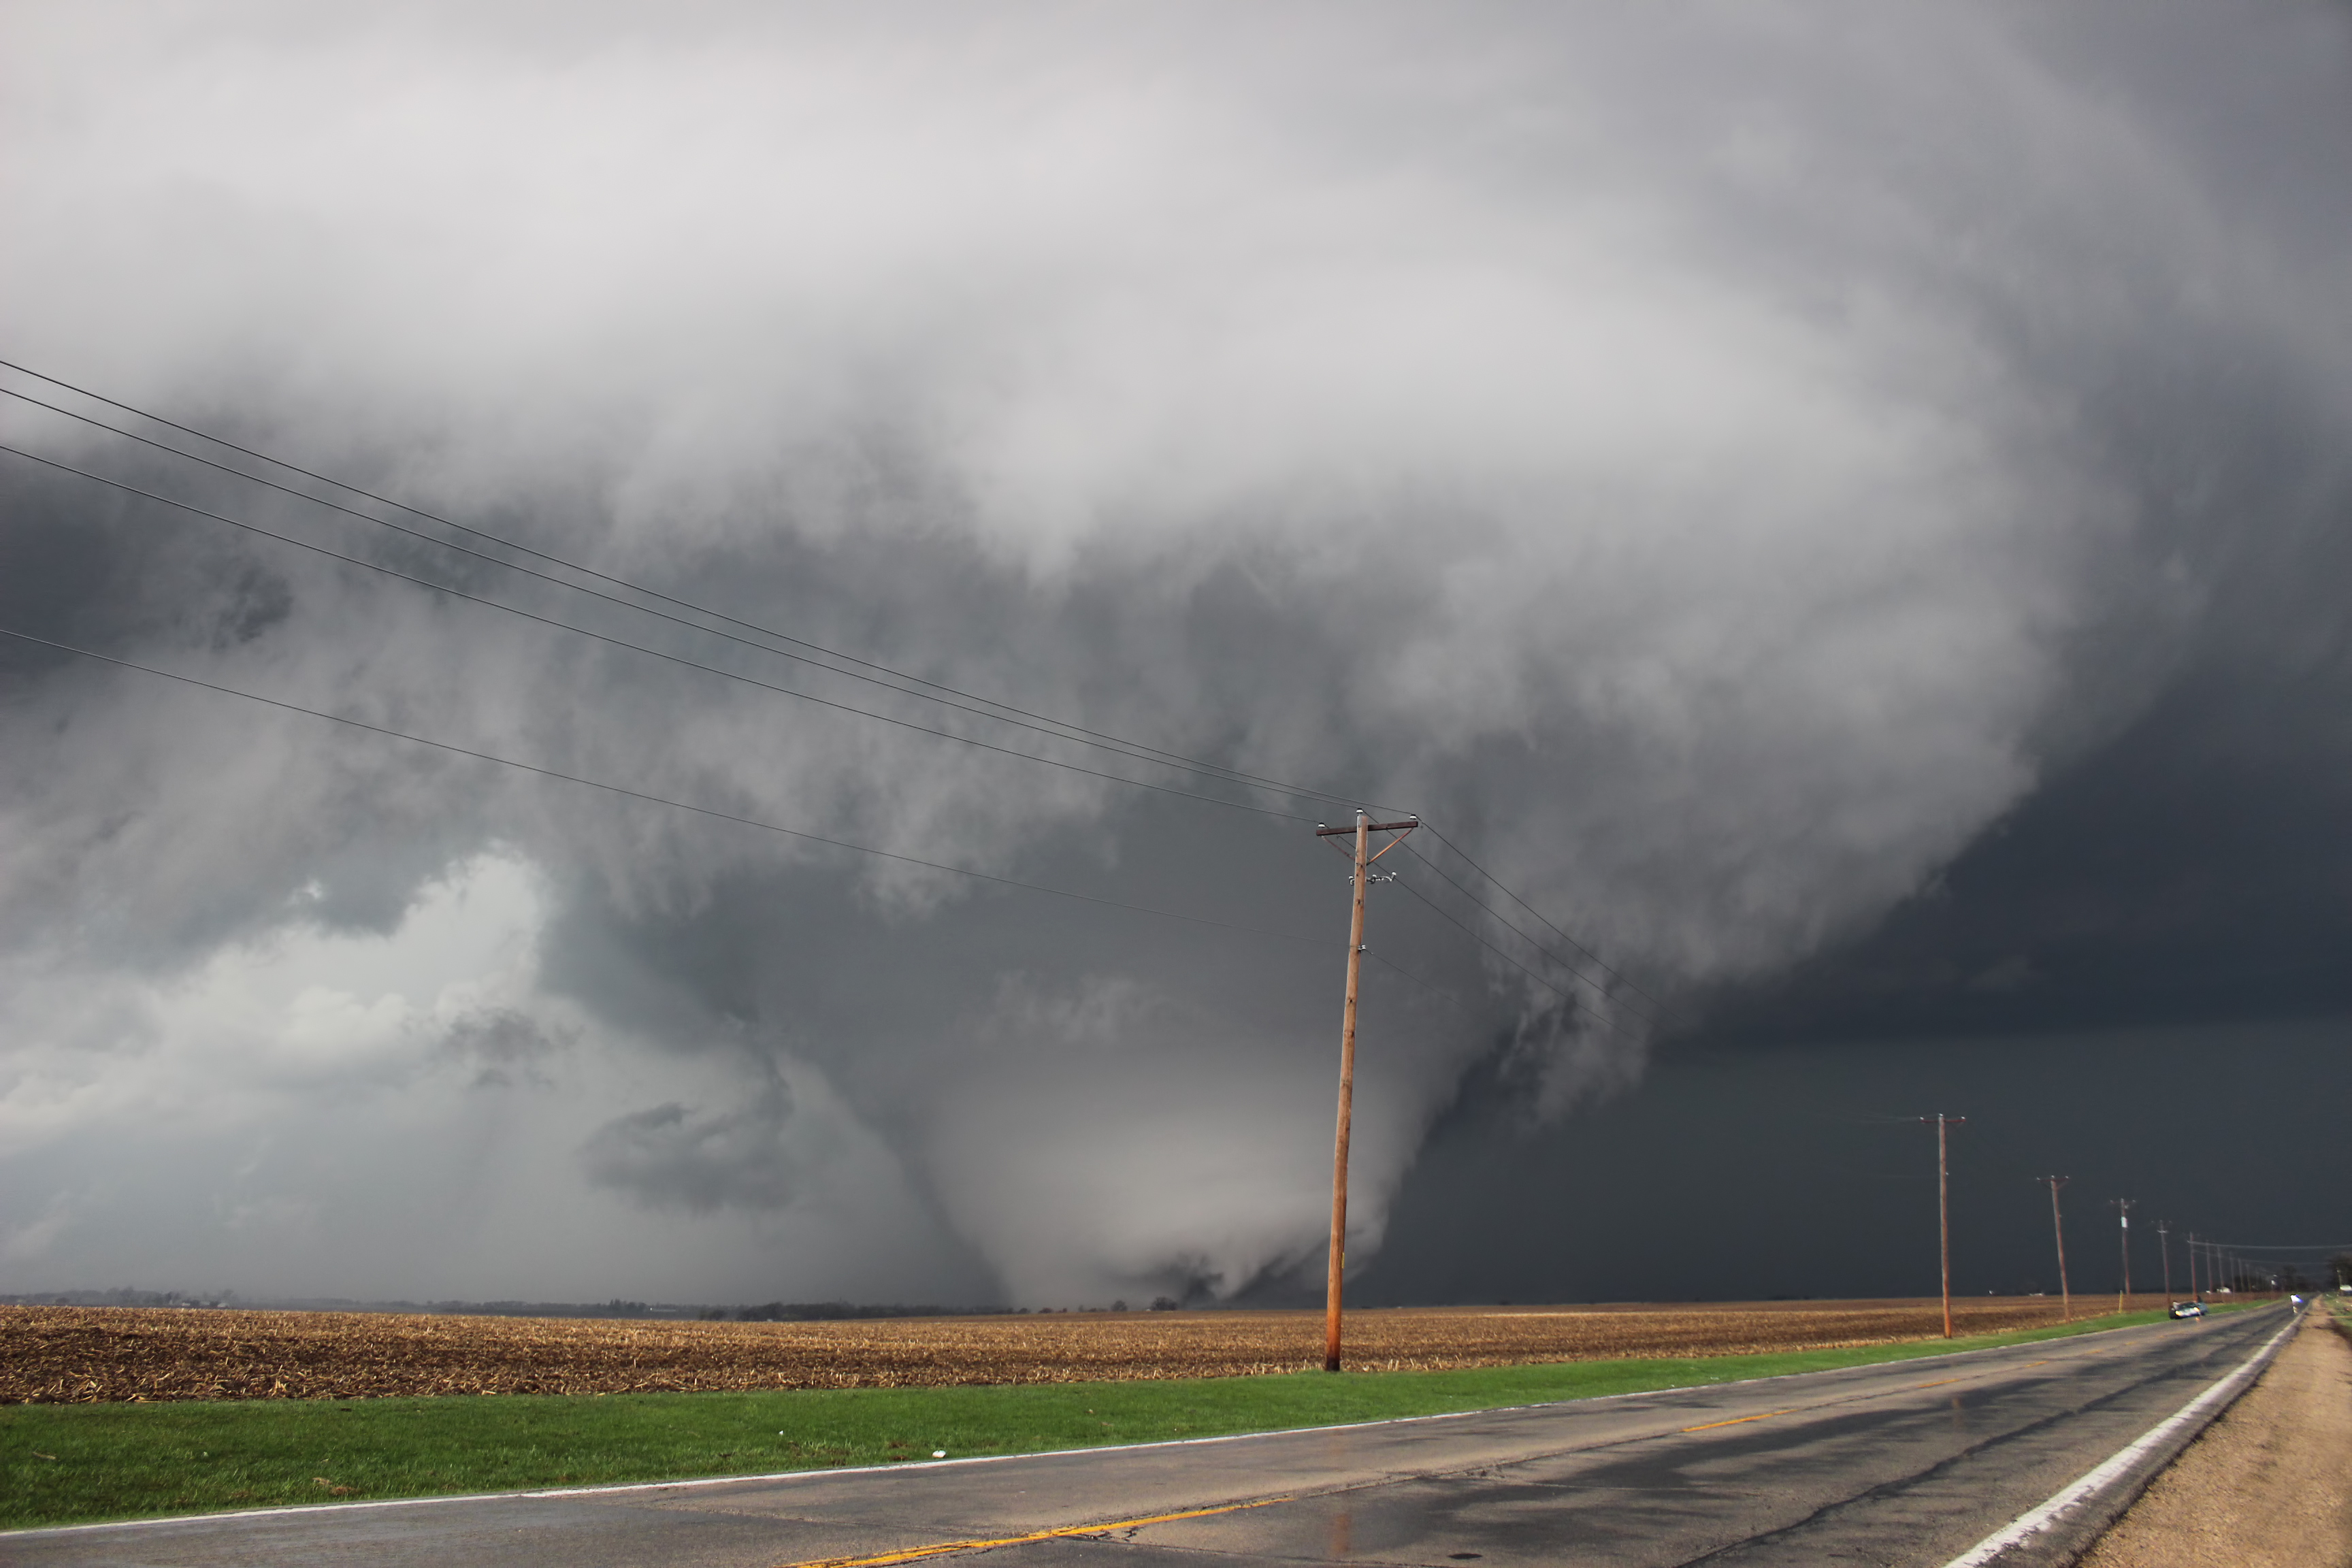 Massive and powerful wedge shaped tornado photographed from approximately one mile away